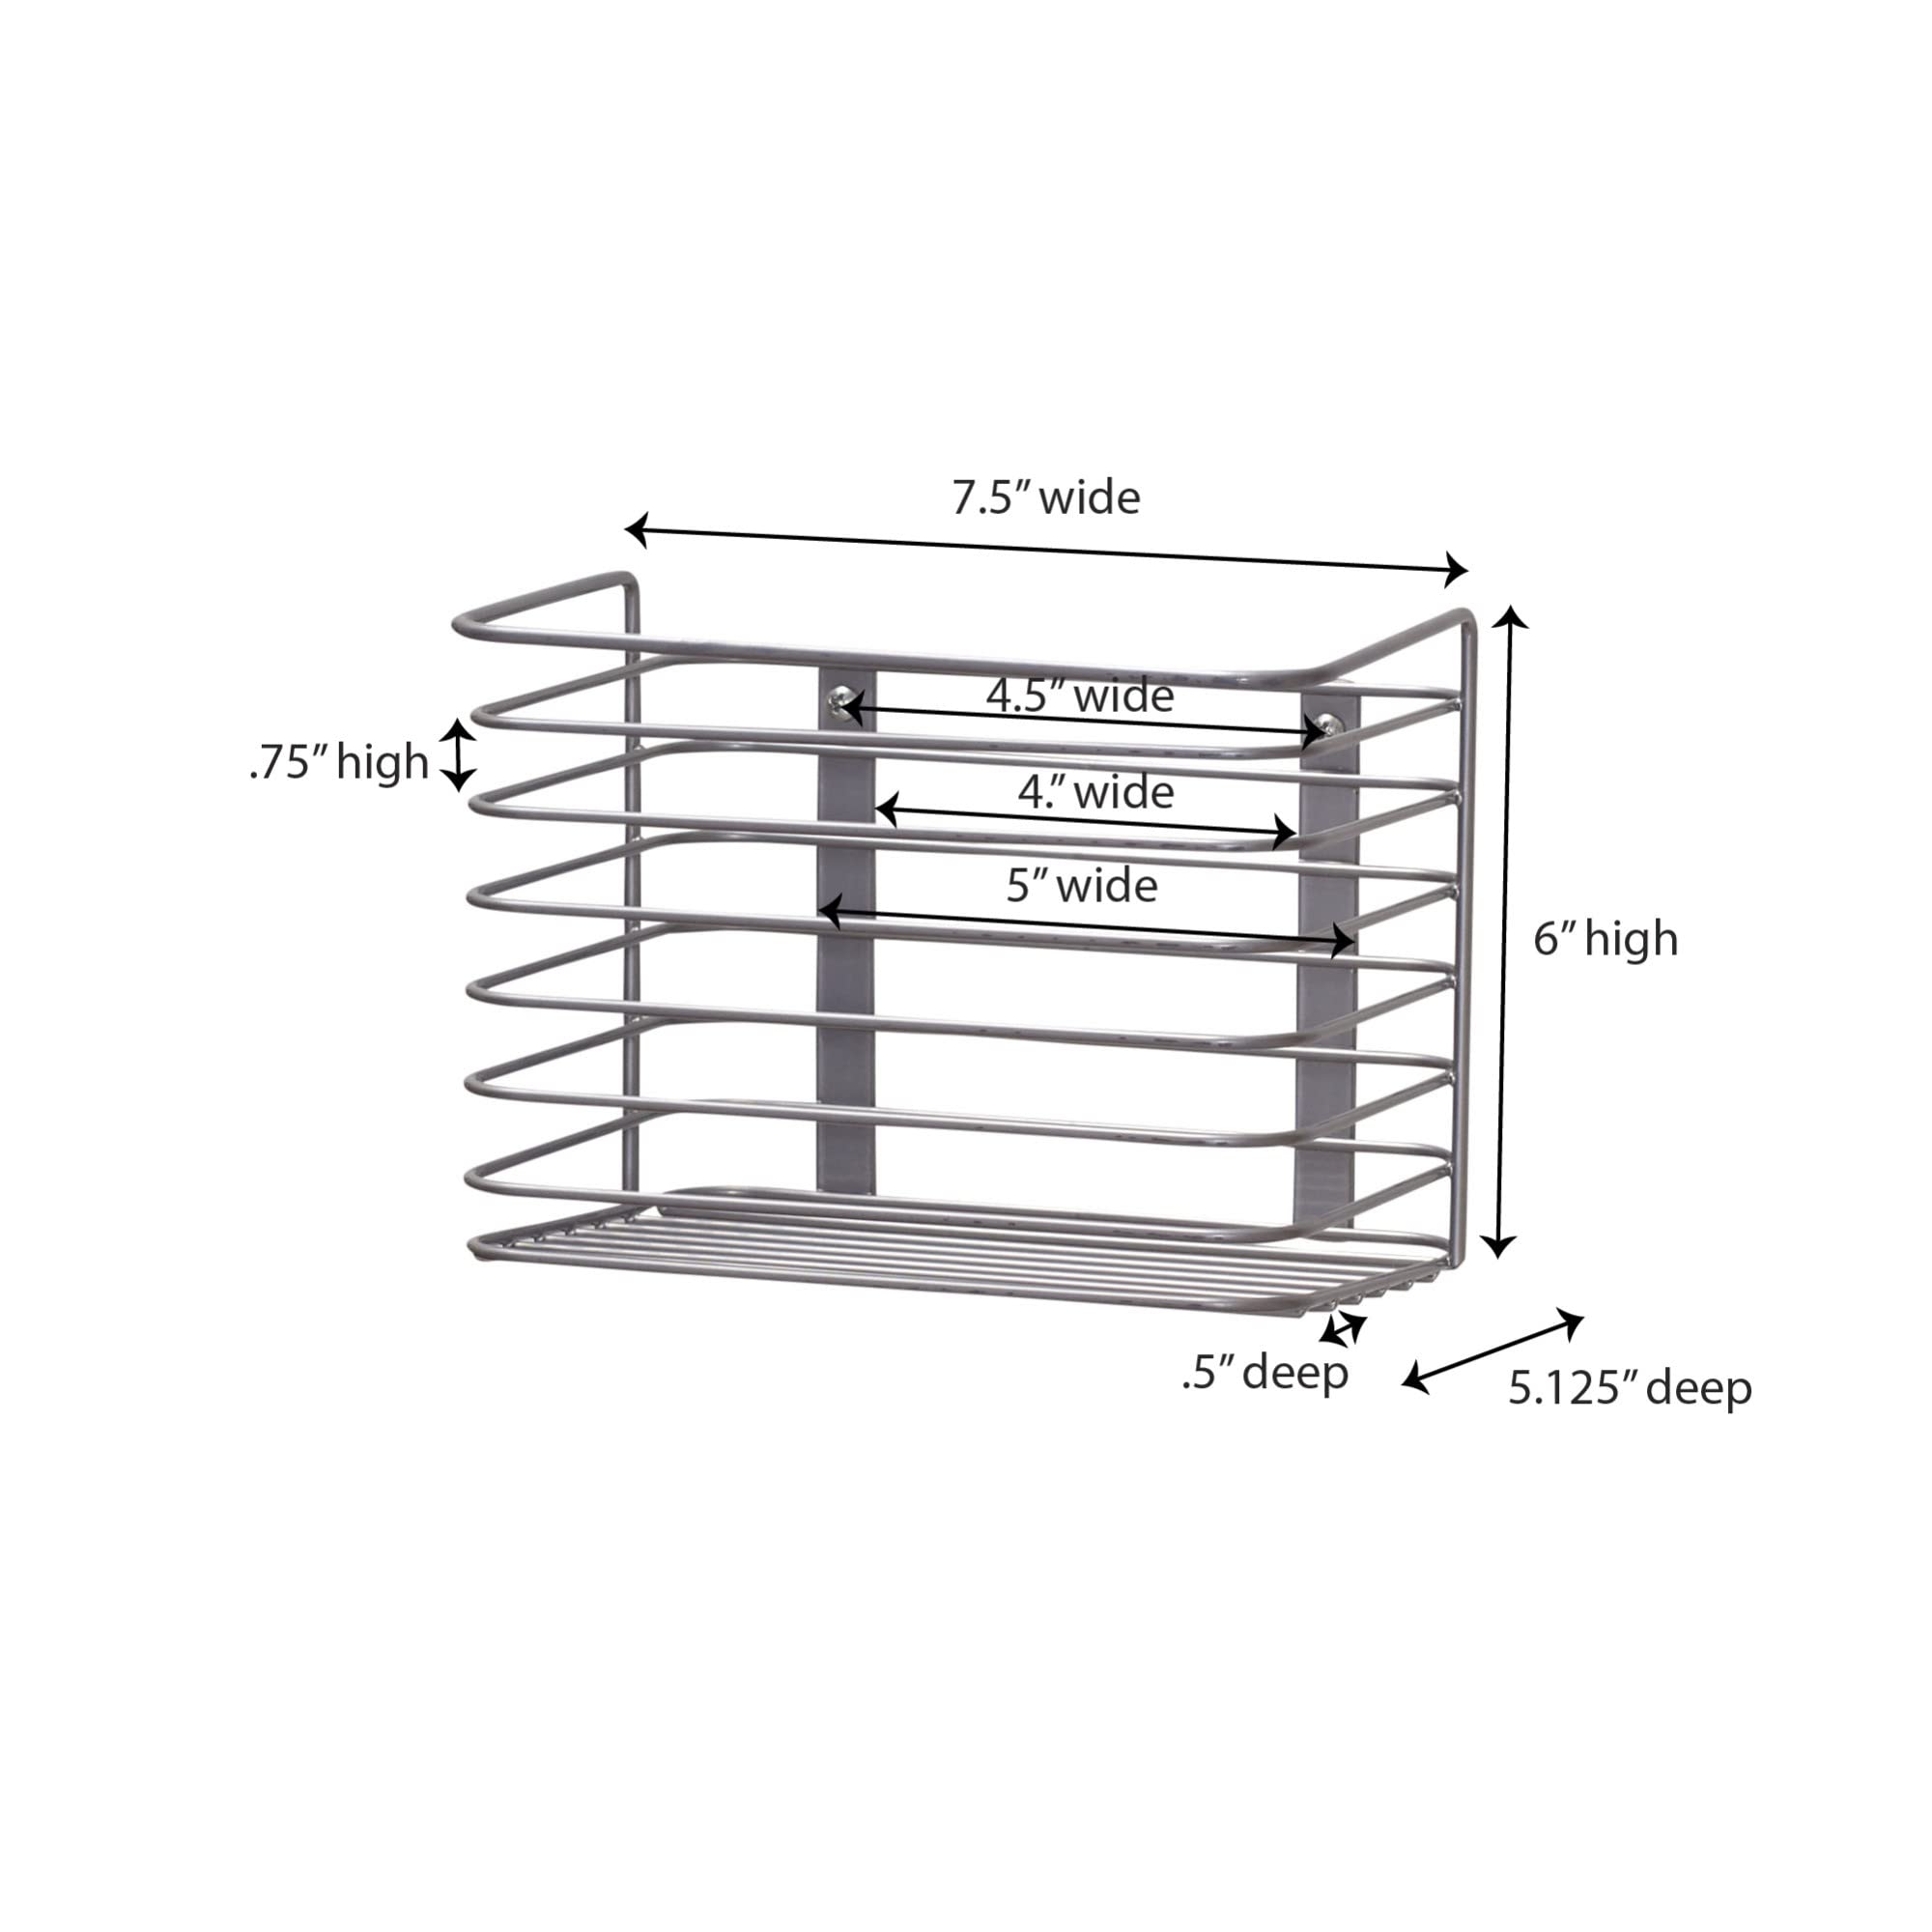 Household Essentials Door Mount Cabinet Organizer, Steel Wire Basket, Attractive Nickel Powder Coating, Great for Saving Space, Mounts to Solid Surface with Hardware Included